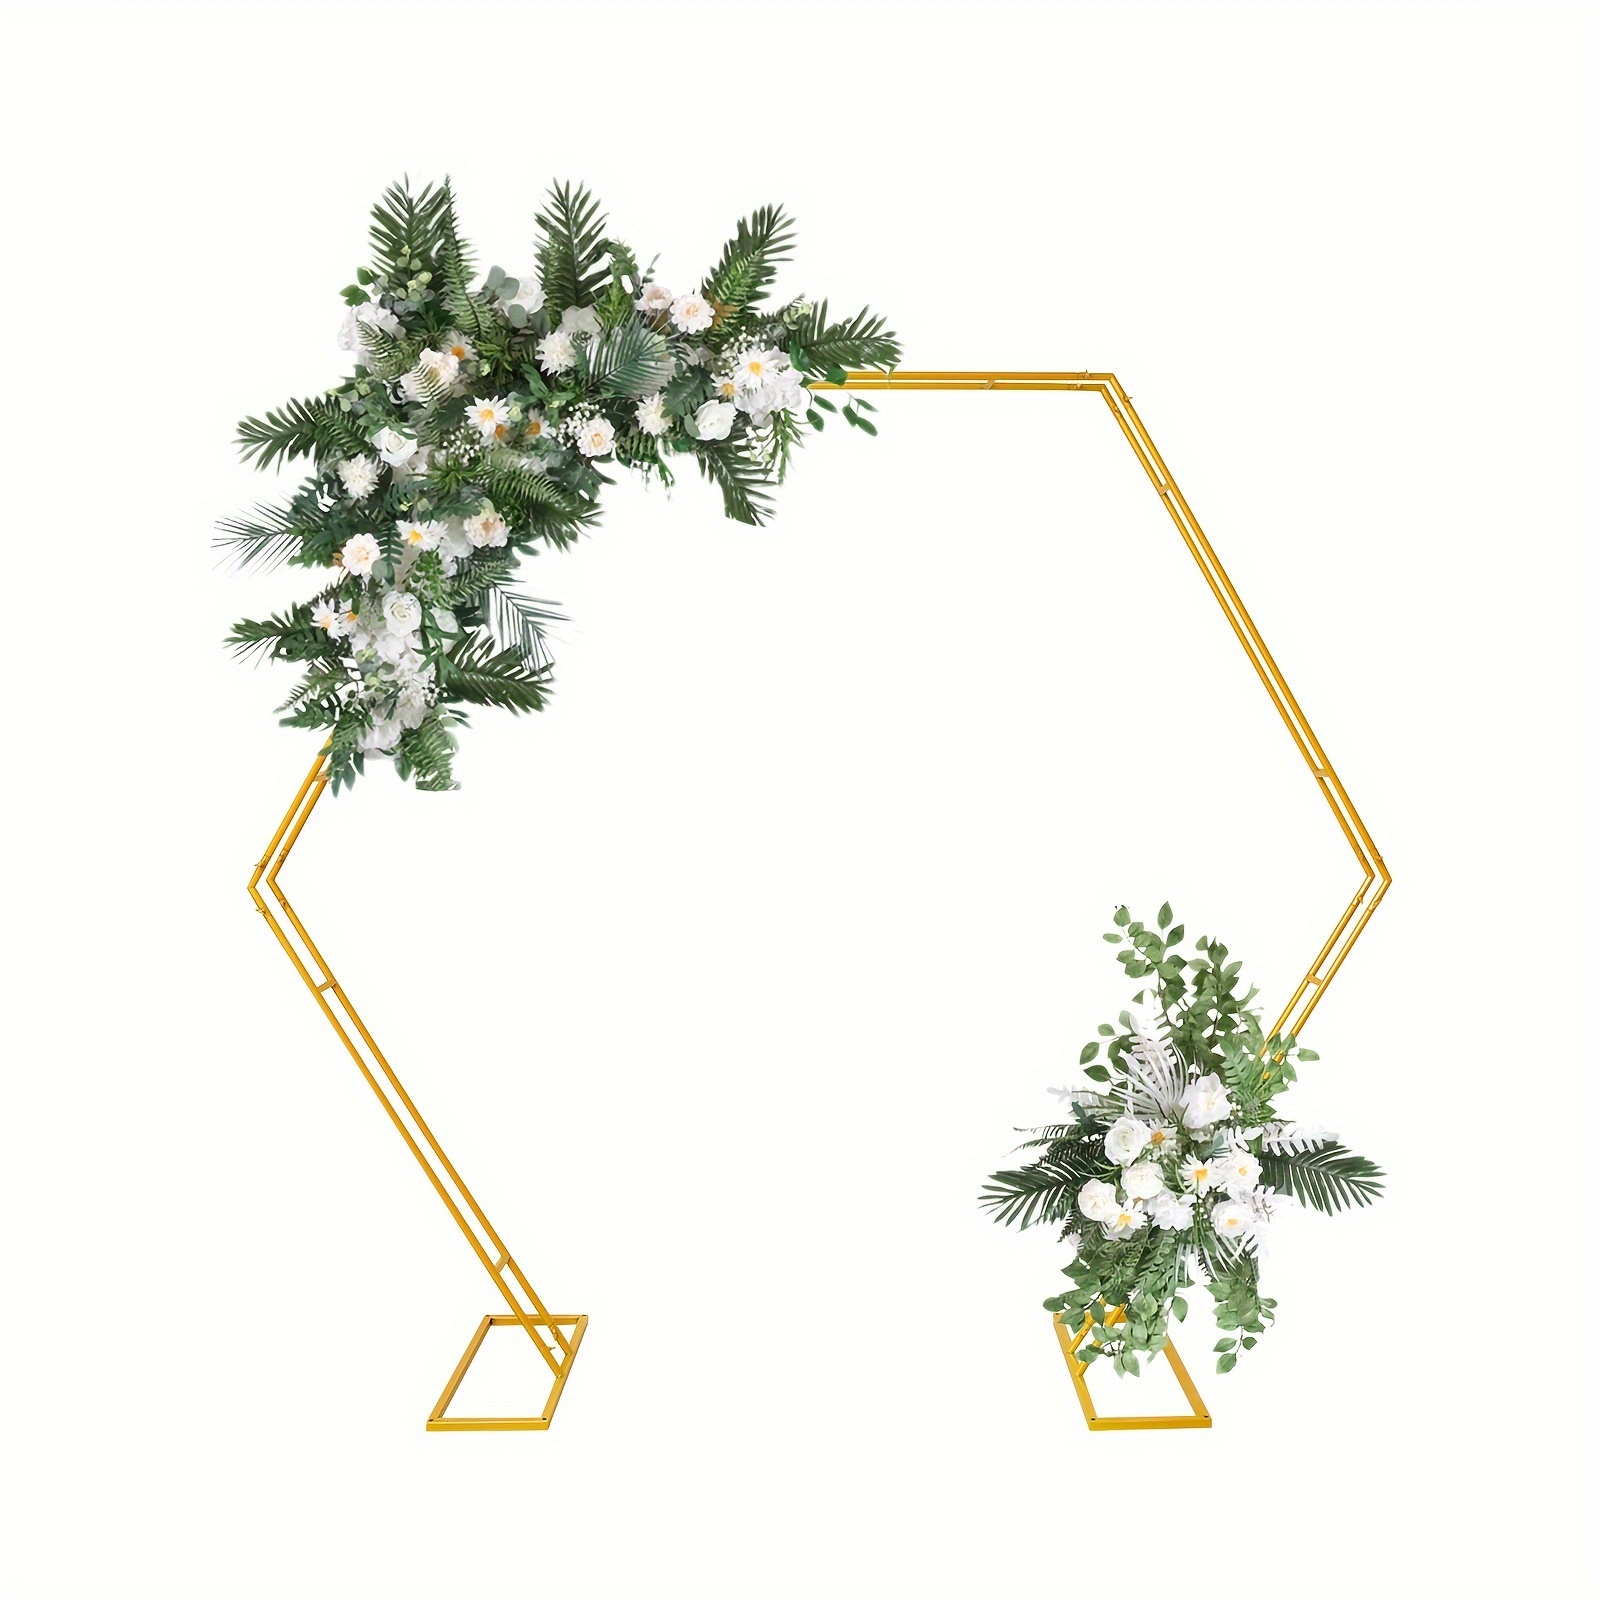 

Golden Hexagonal Wedding Arch Sturdy Double Tube Design For Dreamy Decor And Plant Climbing